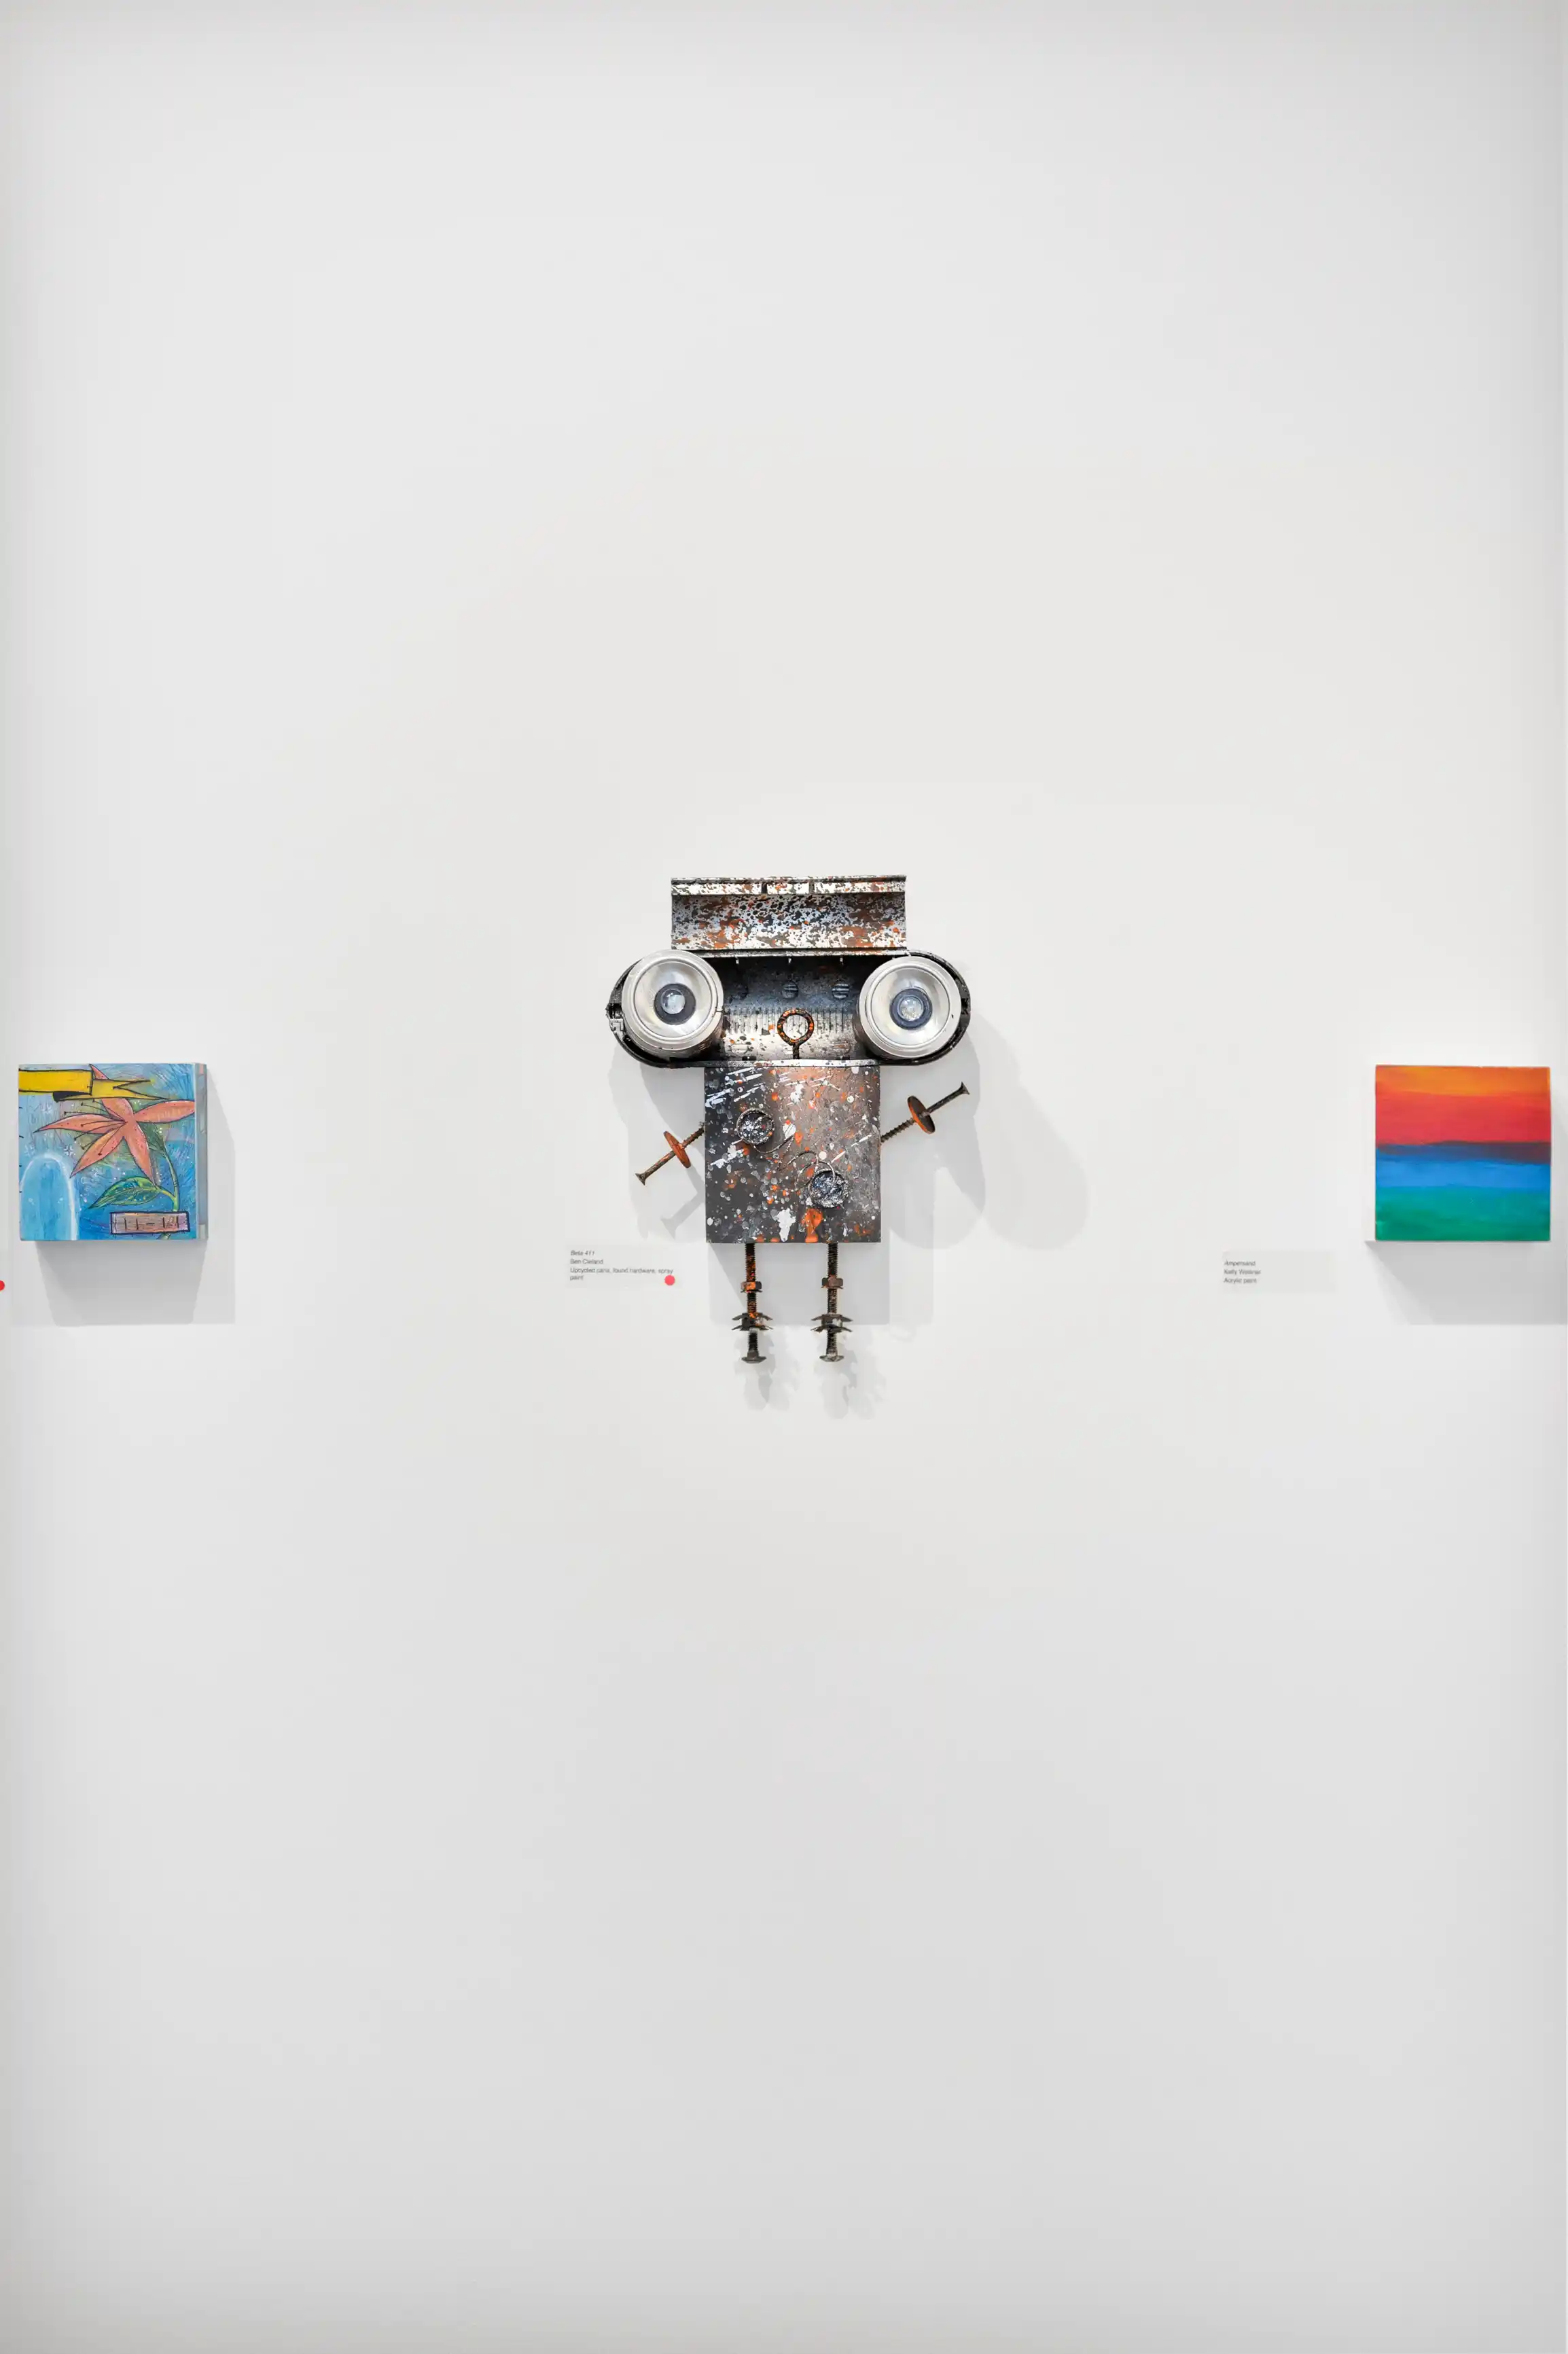 Mixed media artwork resembling a robot, surrounded by various paintings on a white gallery wall.